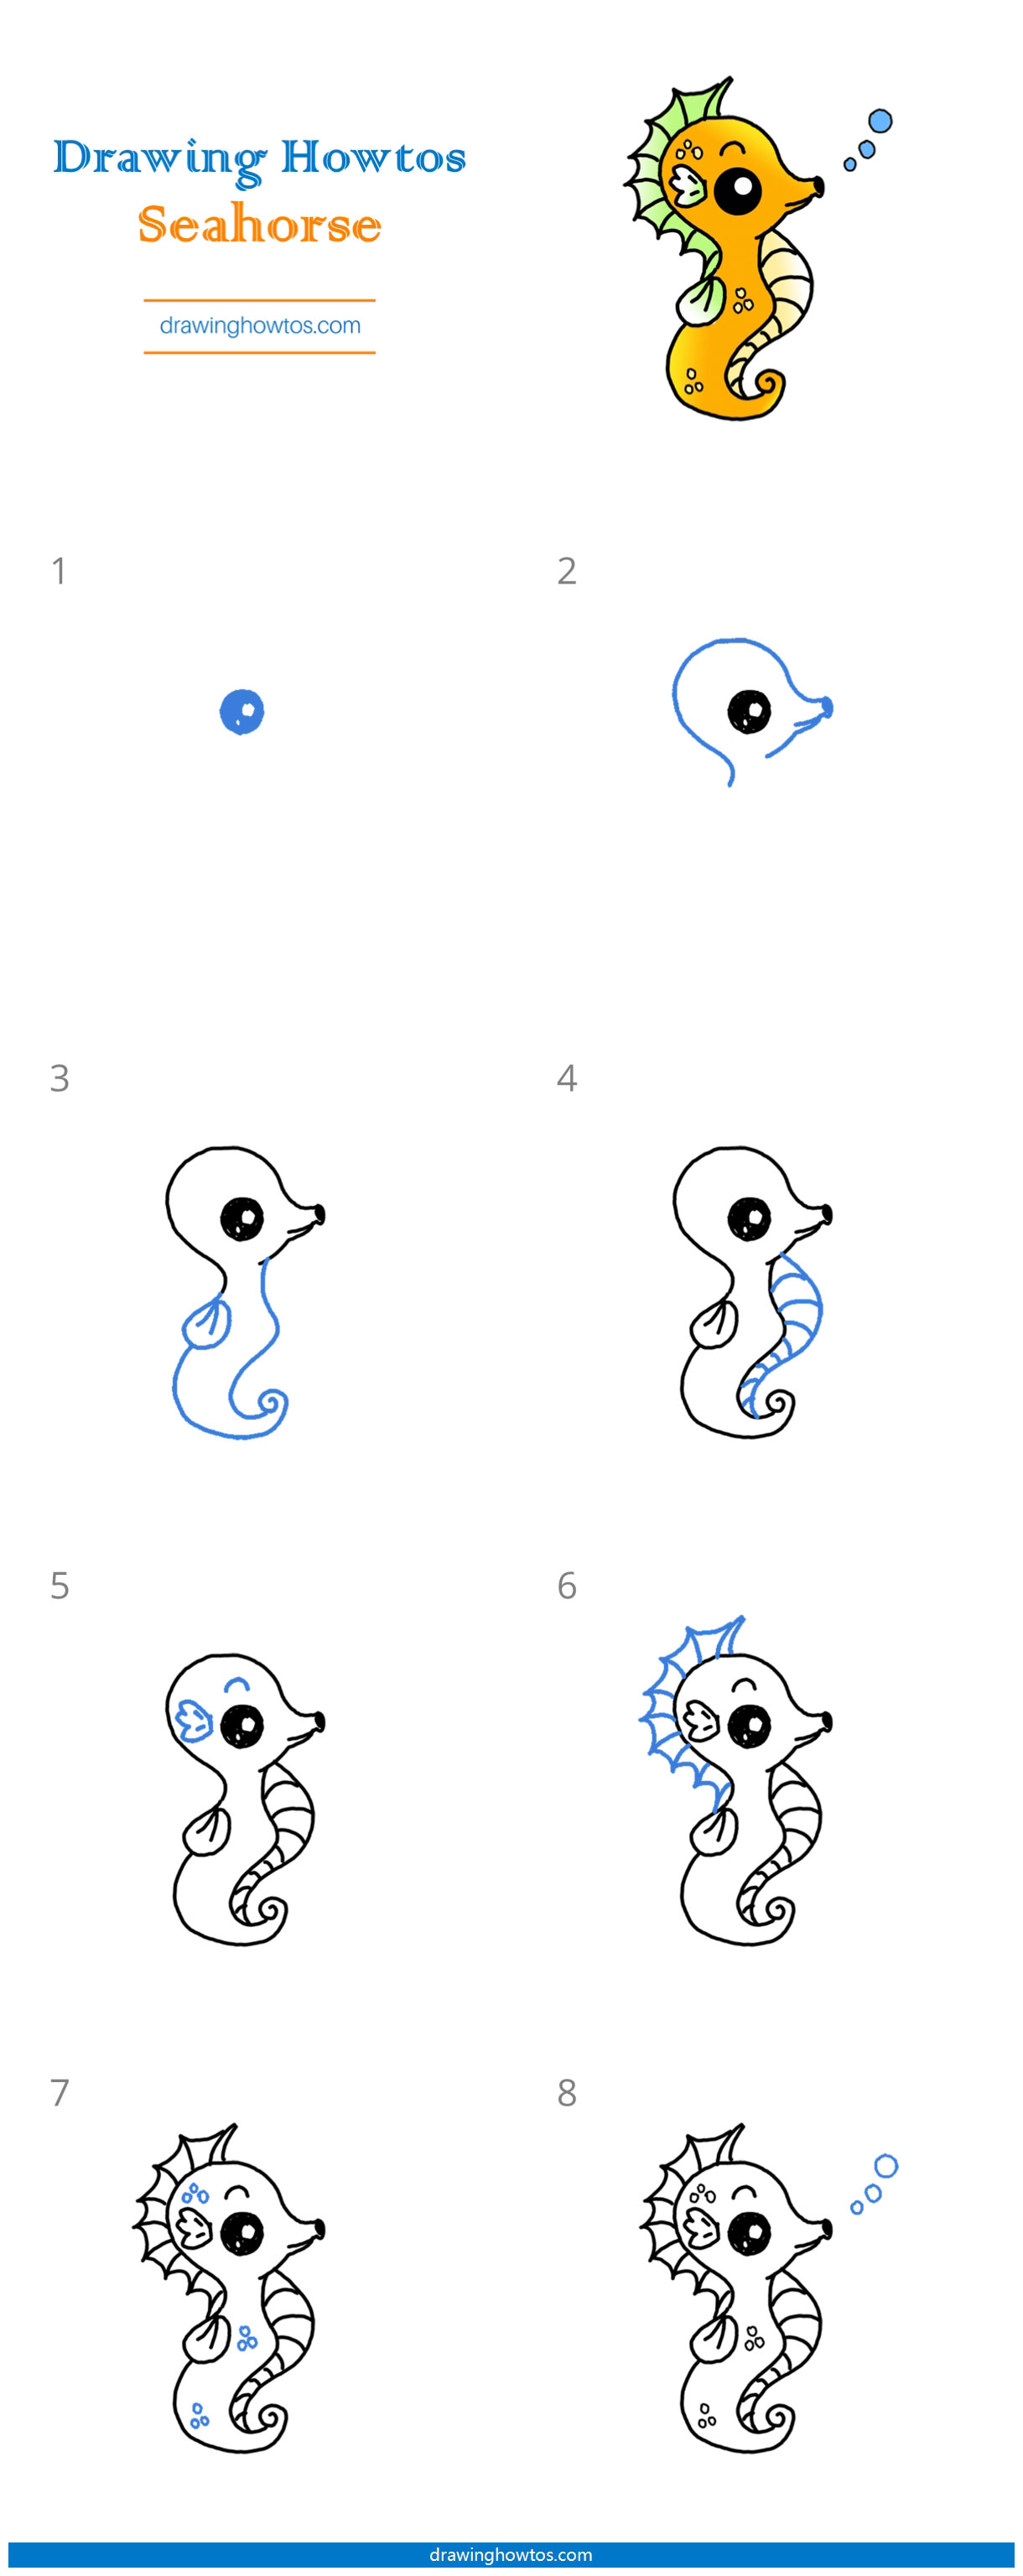 How to Draw a Seahorse Step by Step